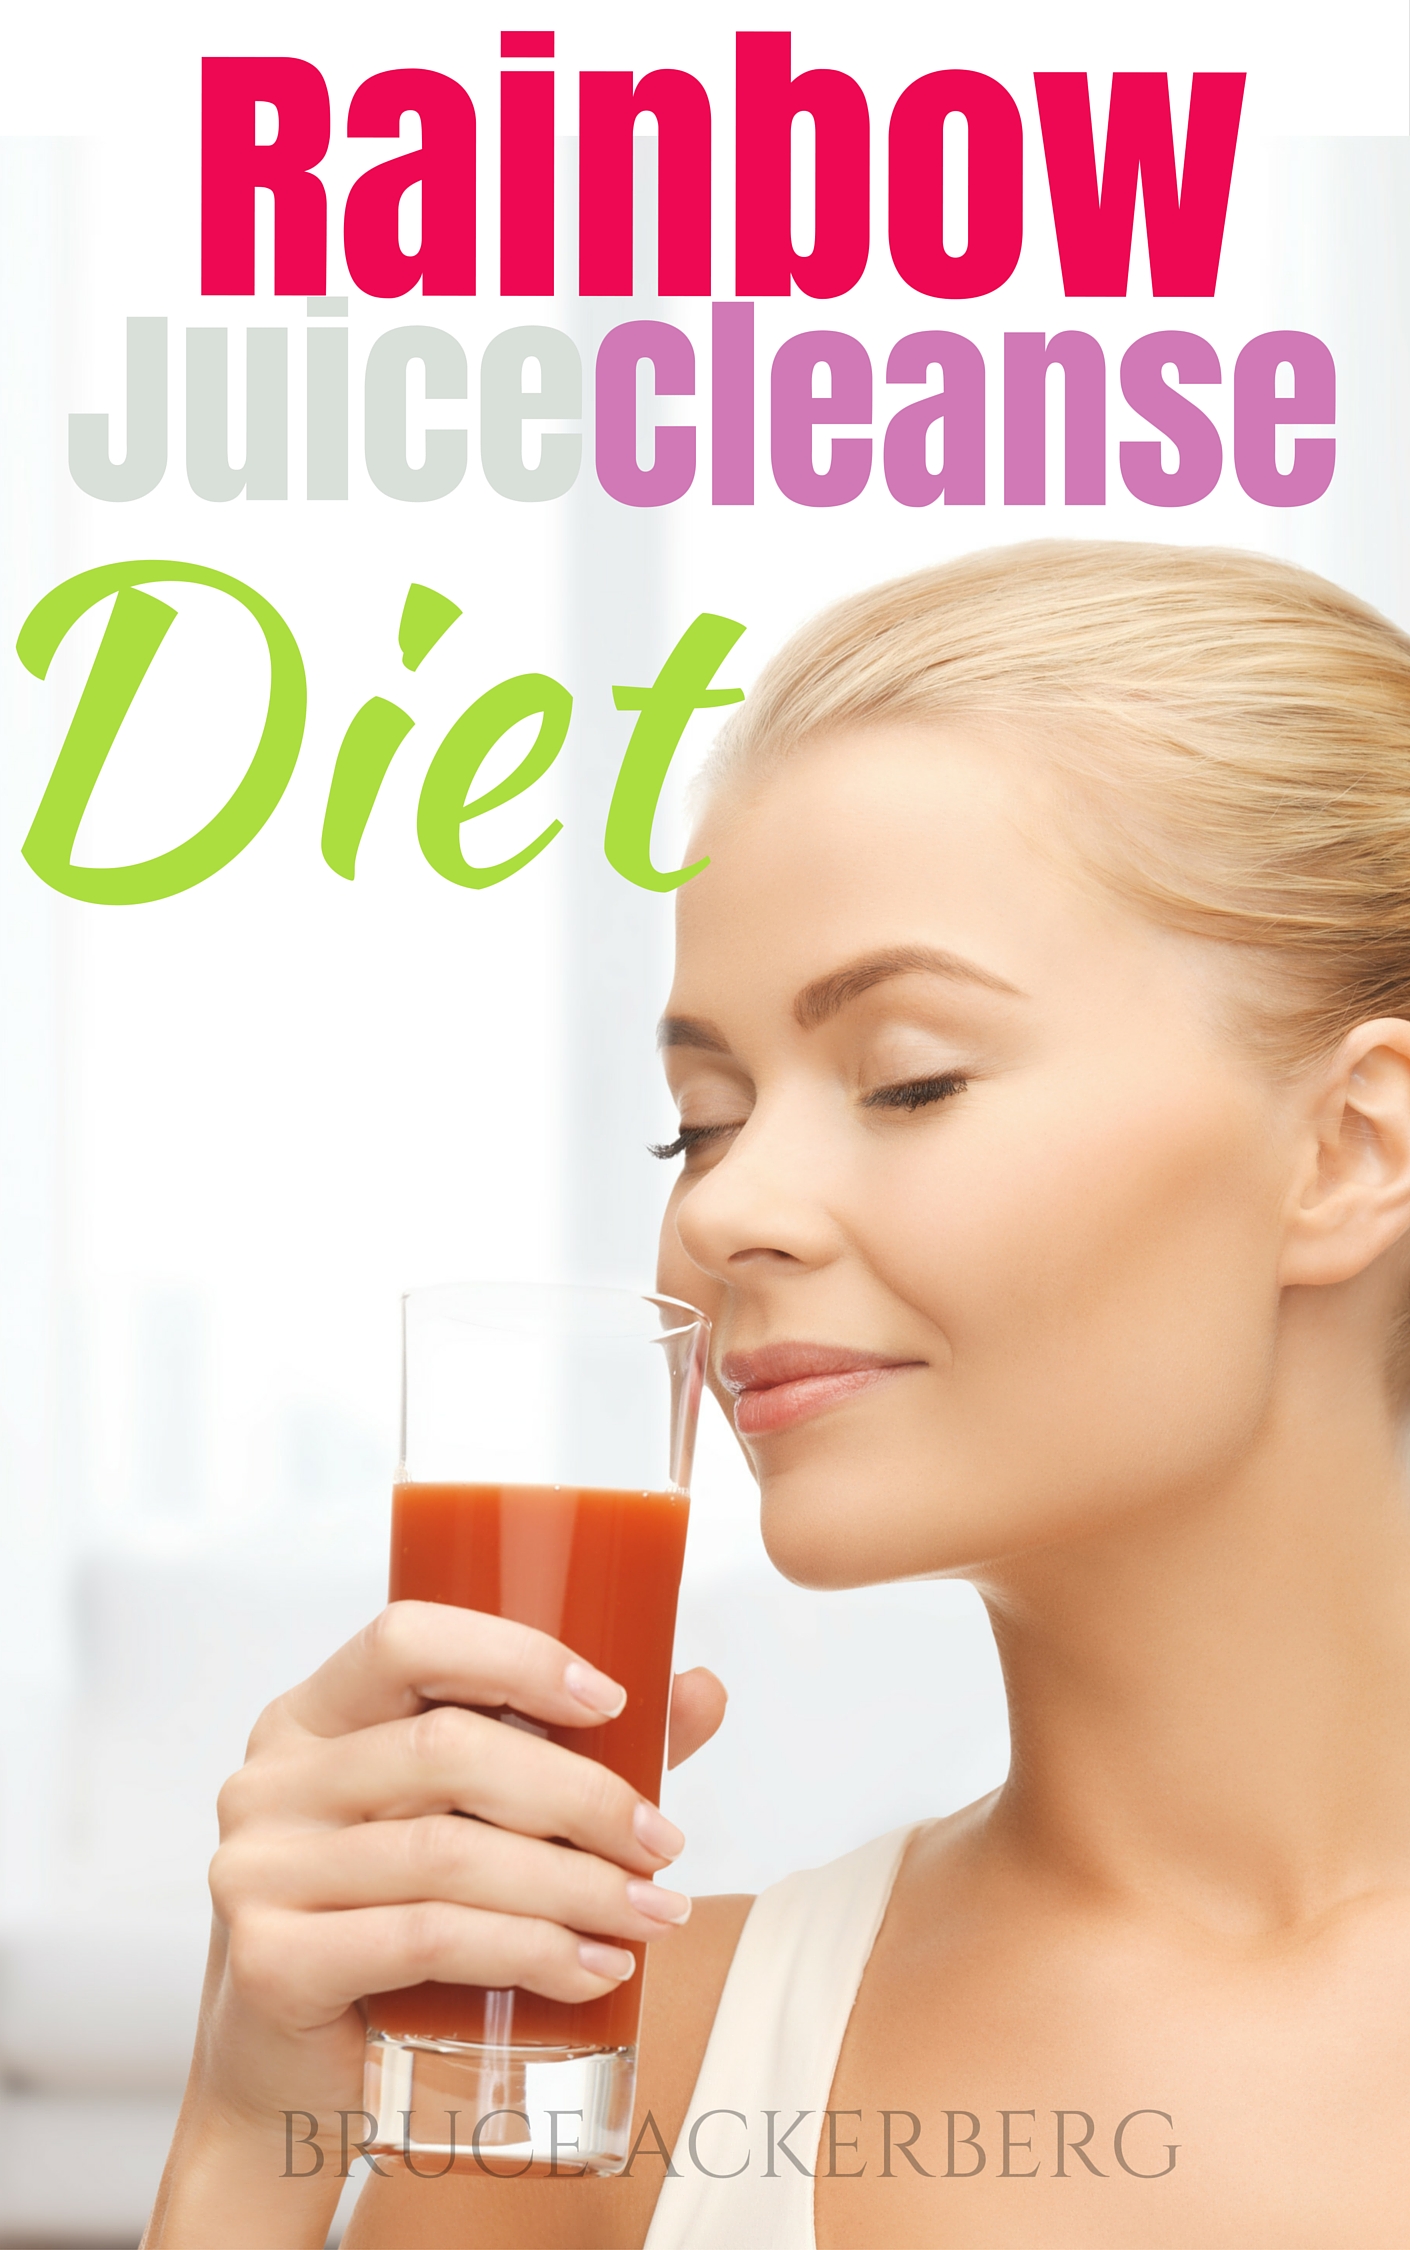 FREE: Rainbow Juice Cleanse Diet: A 9 Day Step by Step Guide for Beginners, Detox Your Body and Lose Weight by Bruce Ackerberg